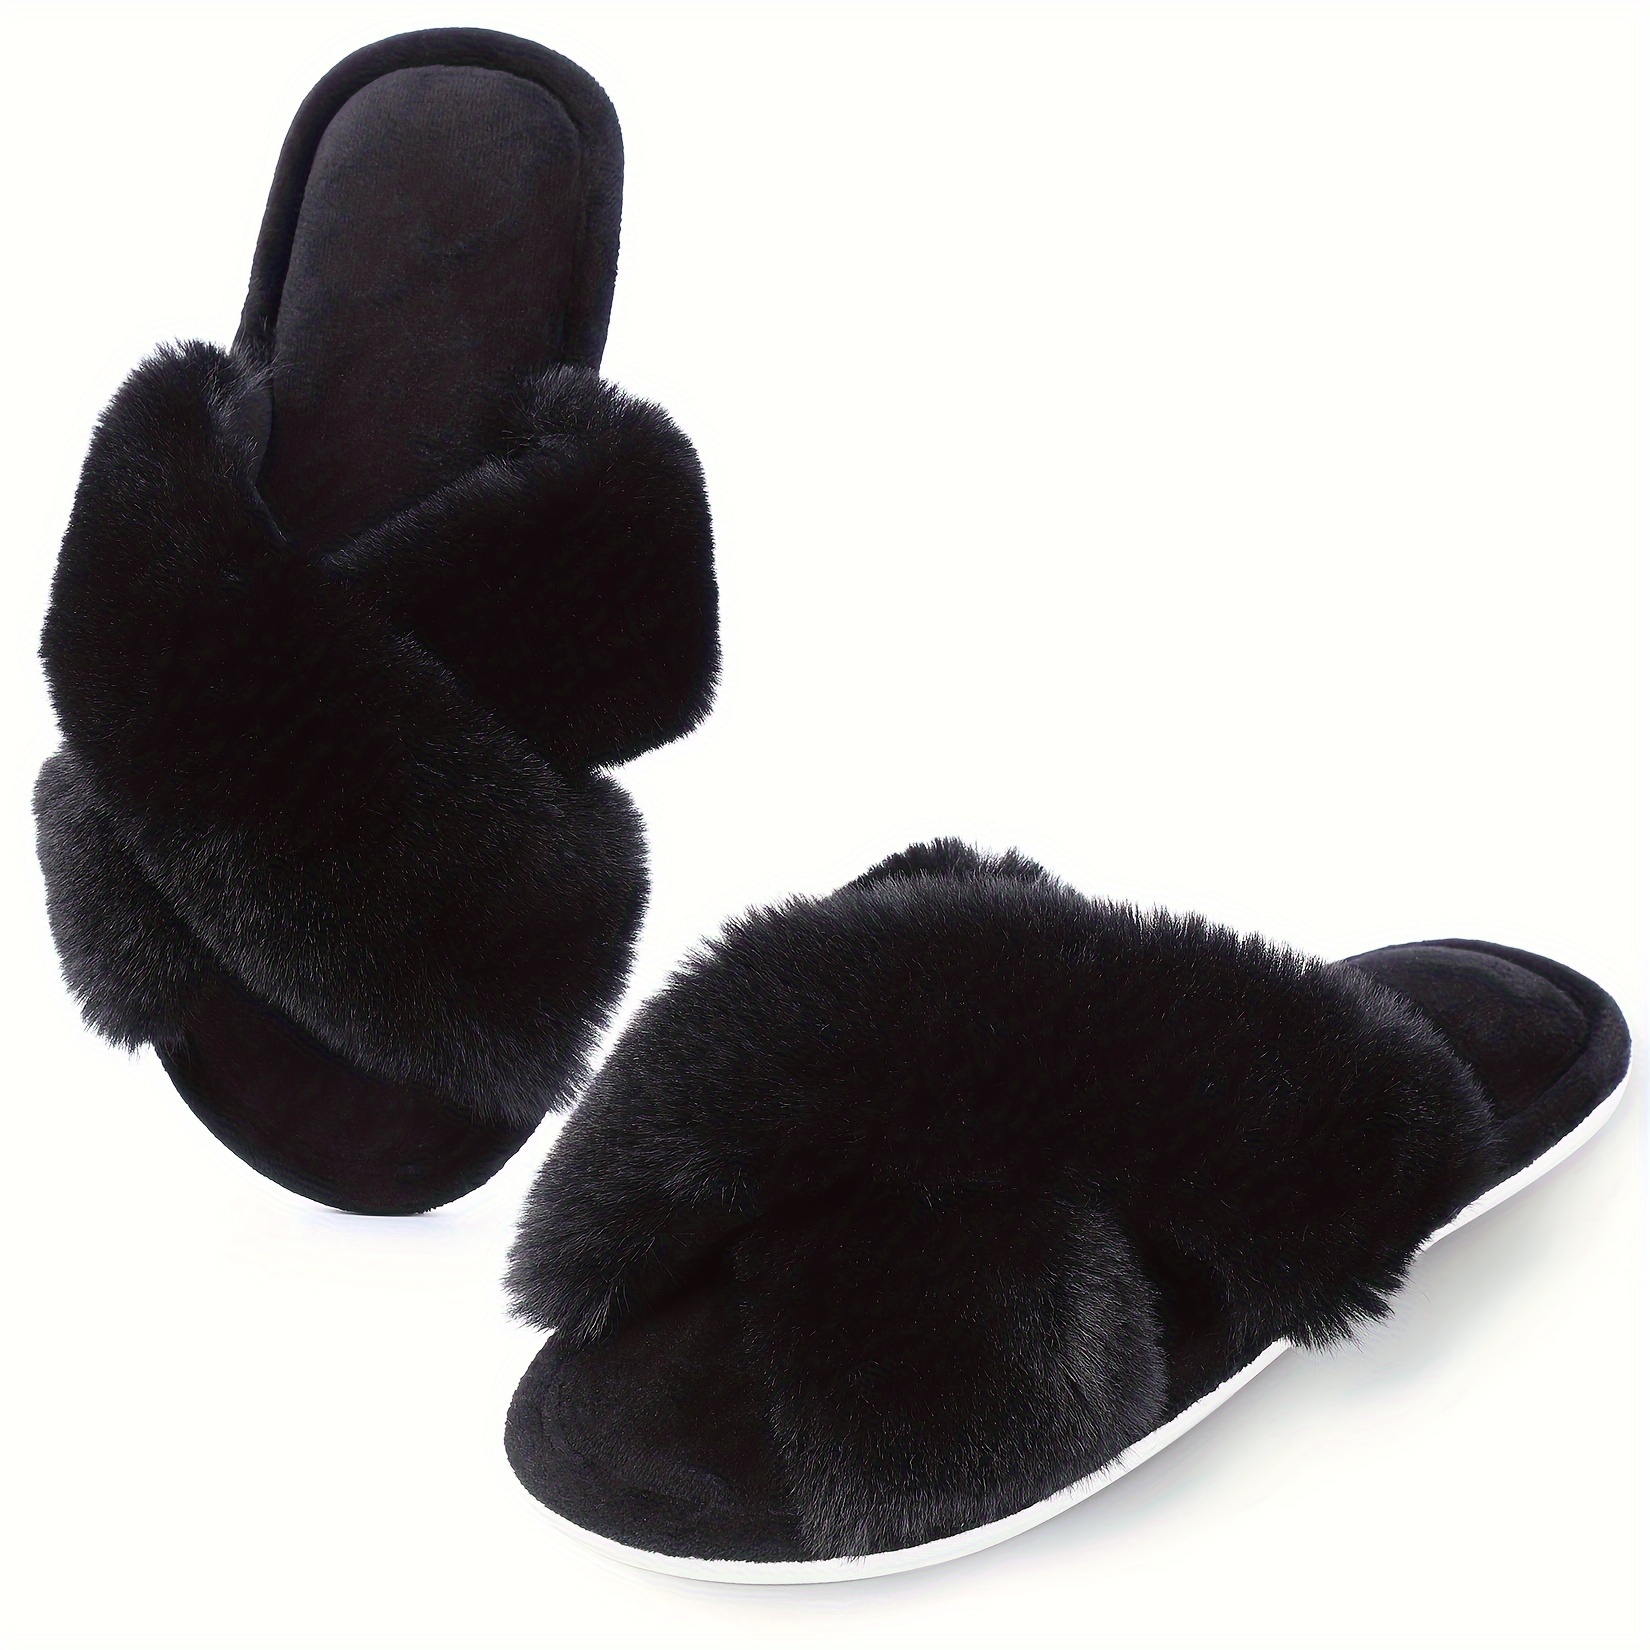 

Women's Indoor Slippers With Soft Fabric Upper, Rubber Outsole, And Cushioned Insole For Home Use